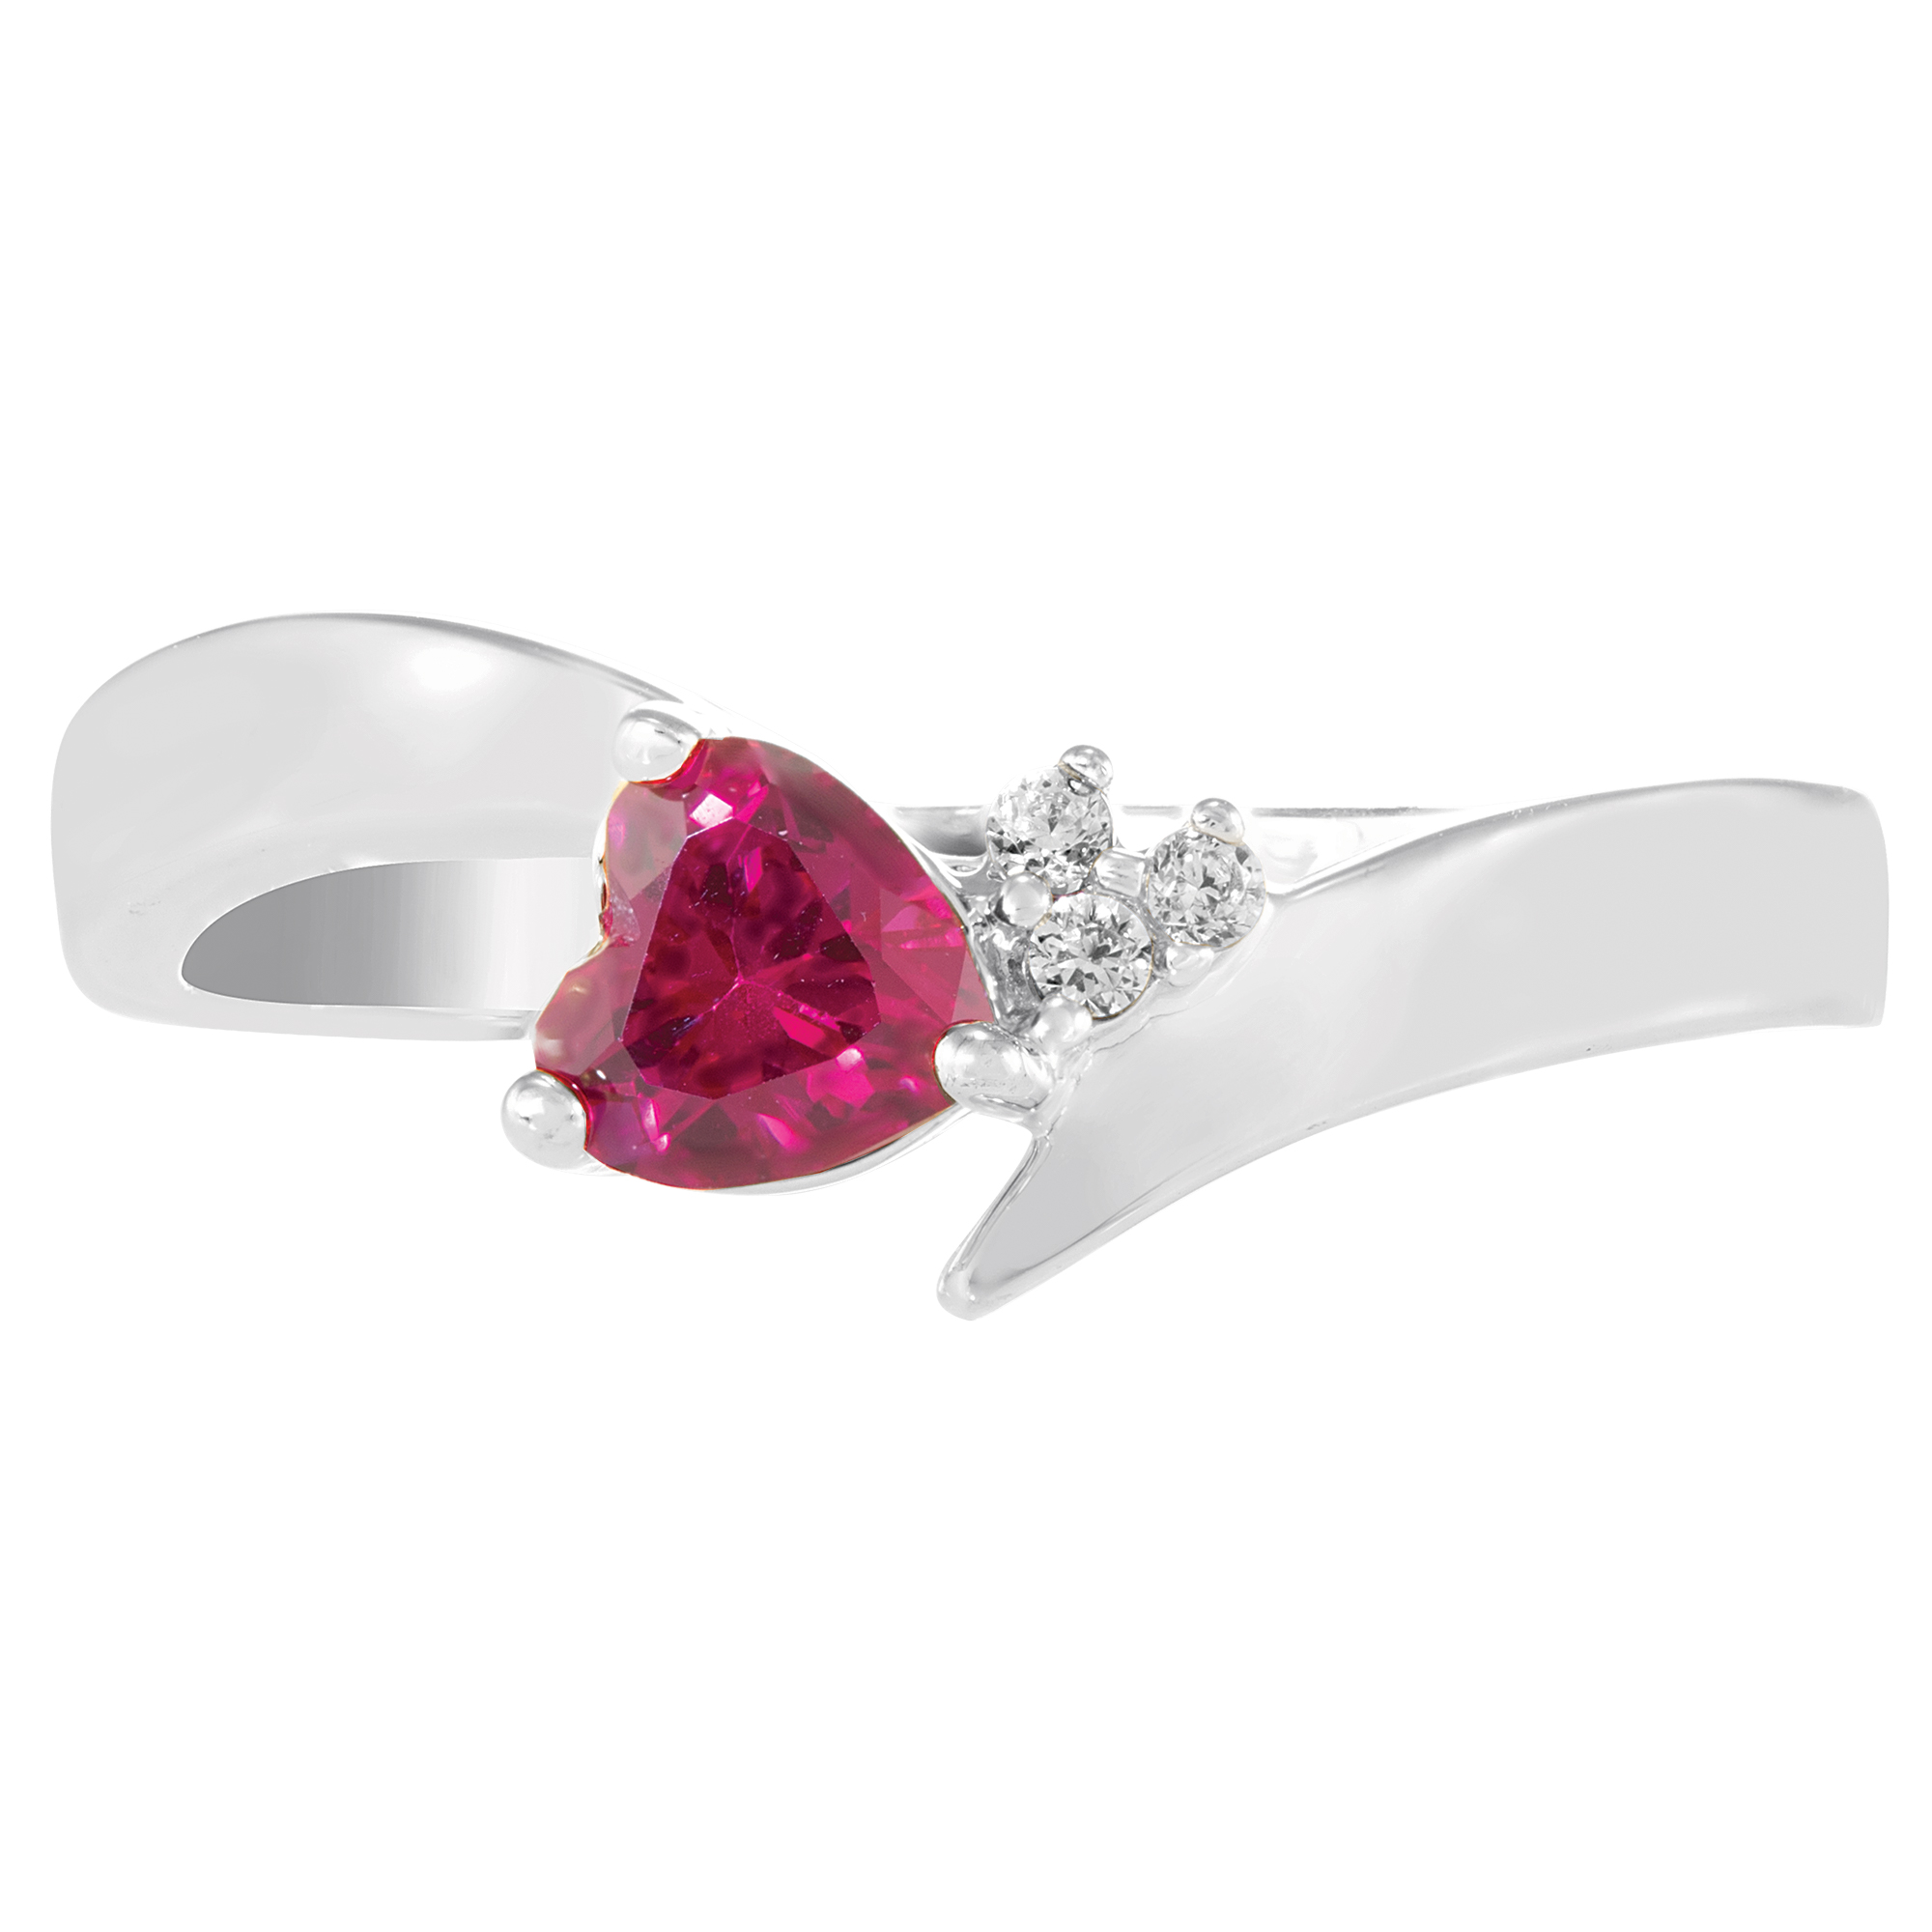 Image of Women's Heart Promise Ring: Corazon